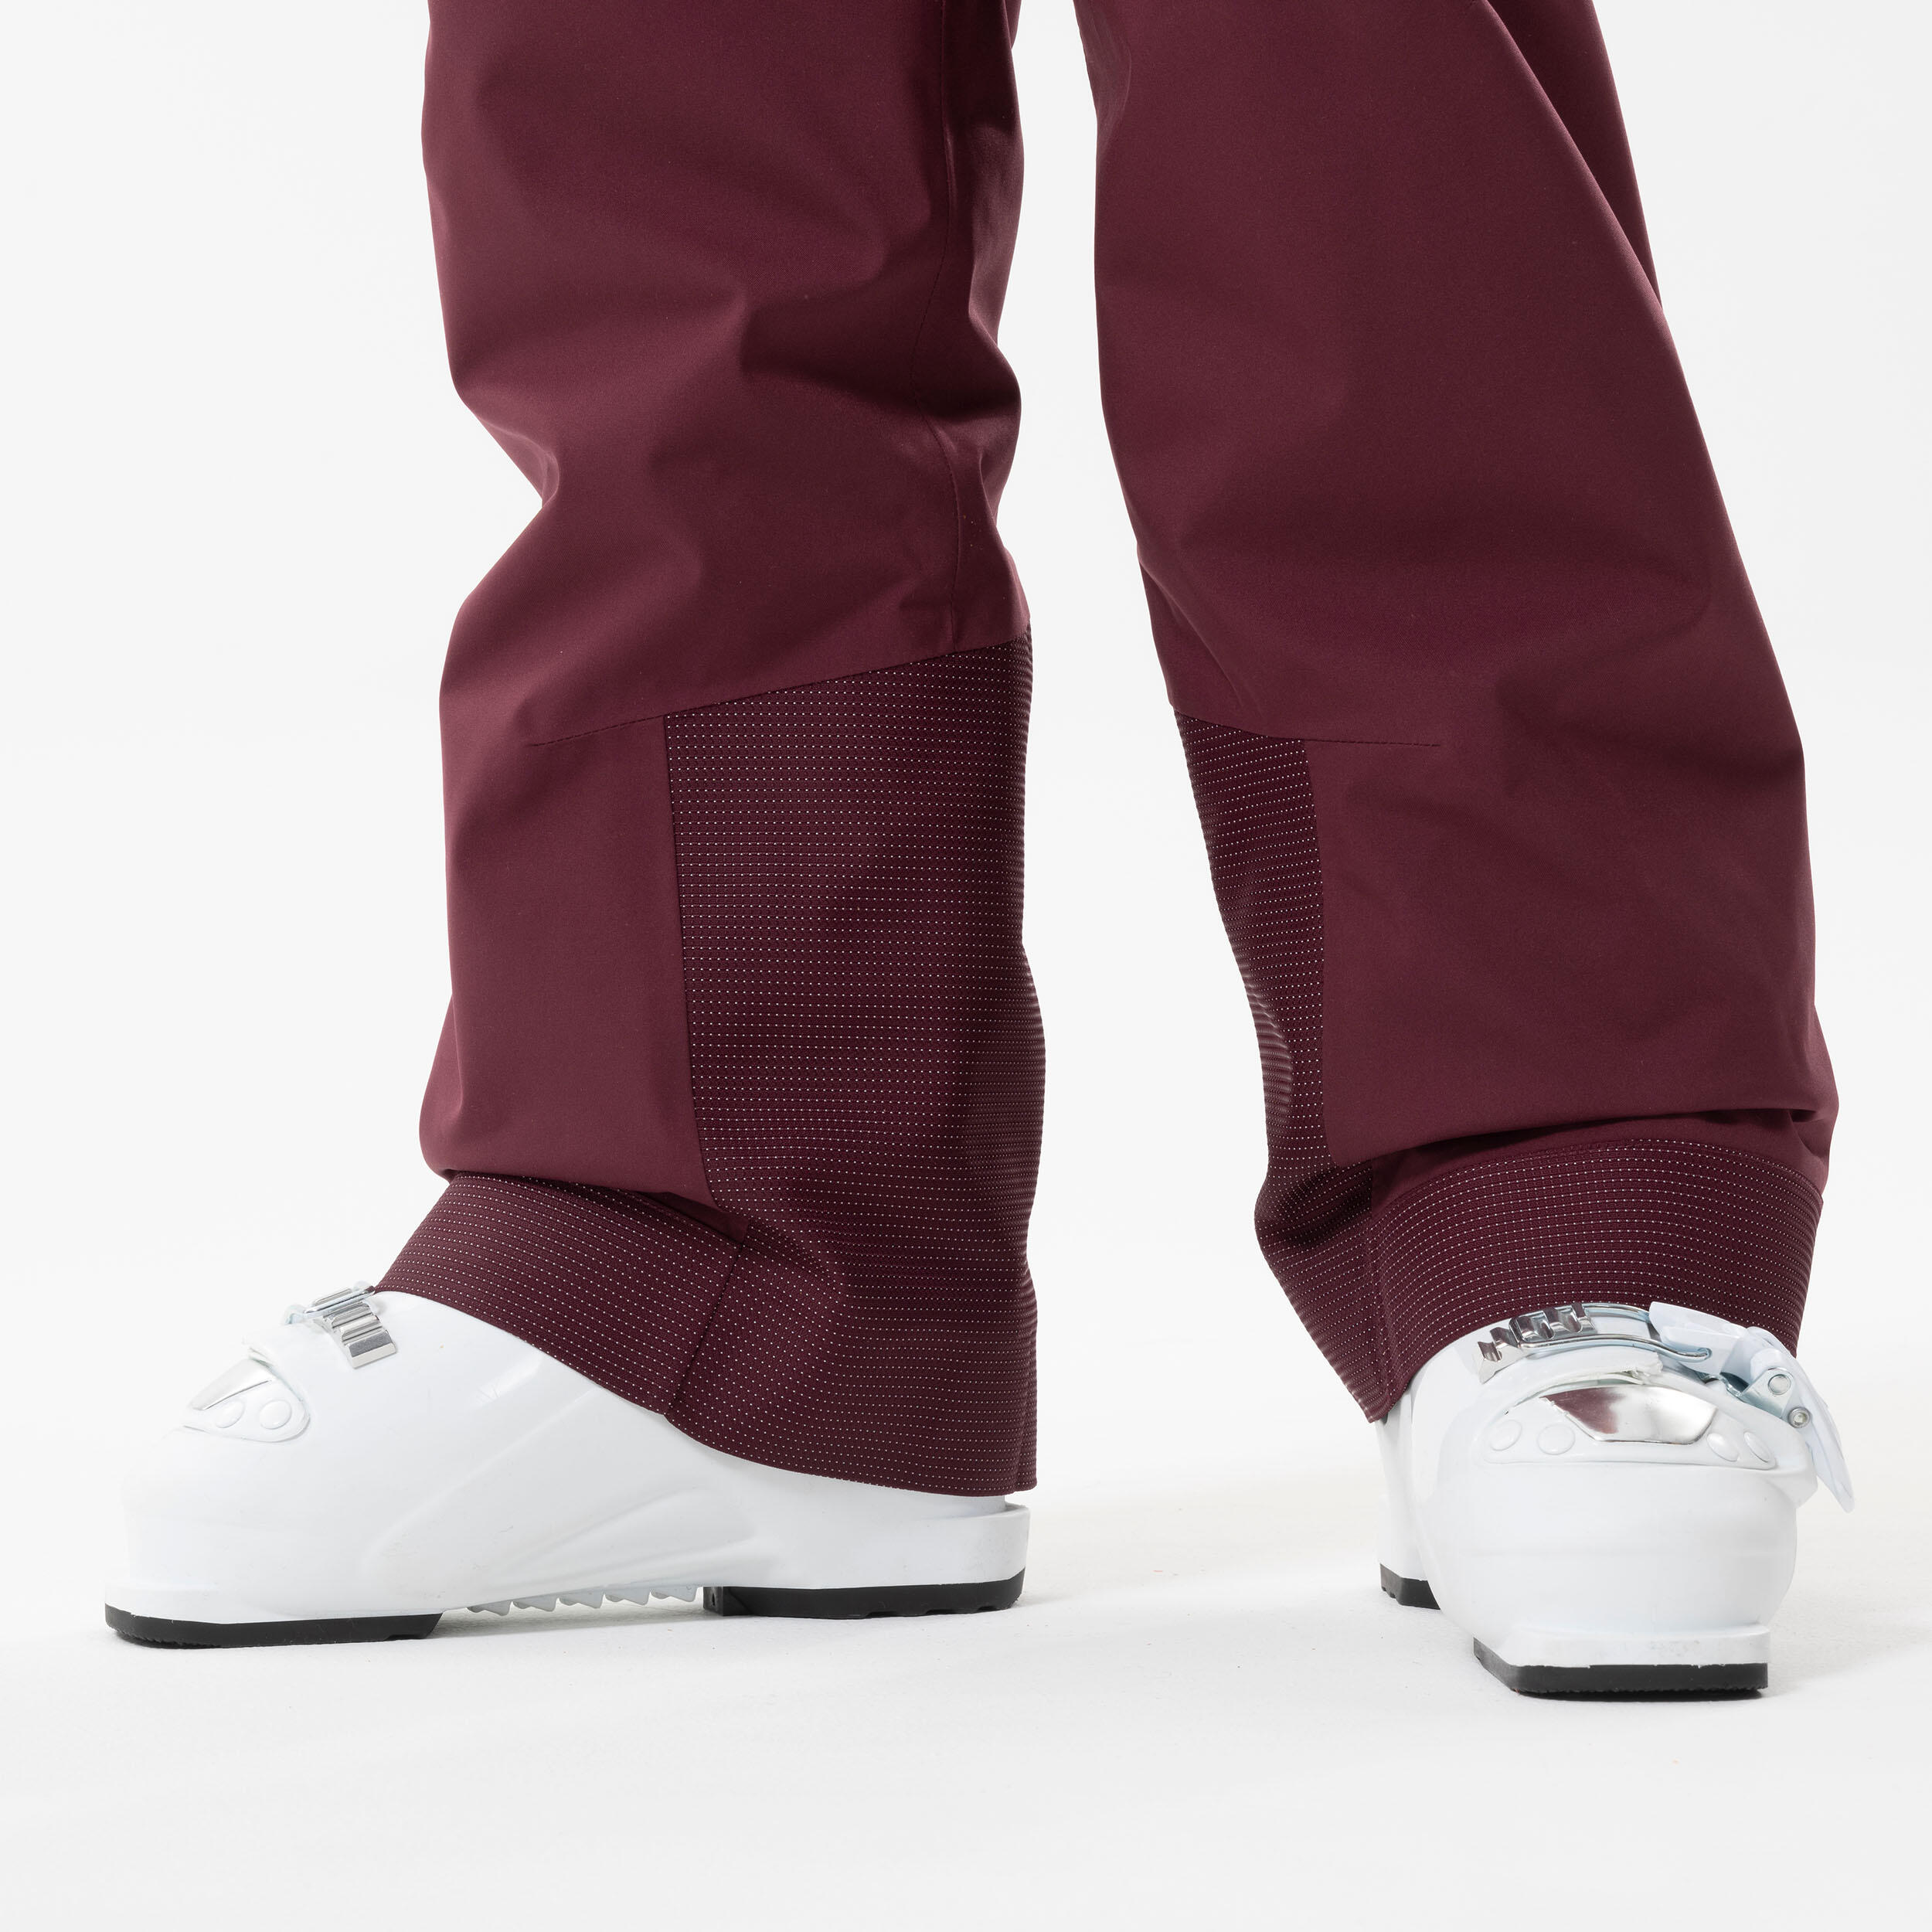 KIDS’ SKI TROUSERS WITH BACK PROTECTOR - FR900 - BURGUNDY 7/11